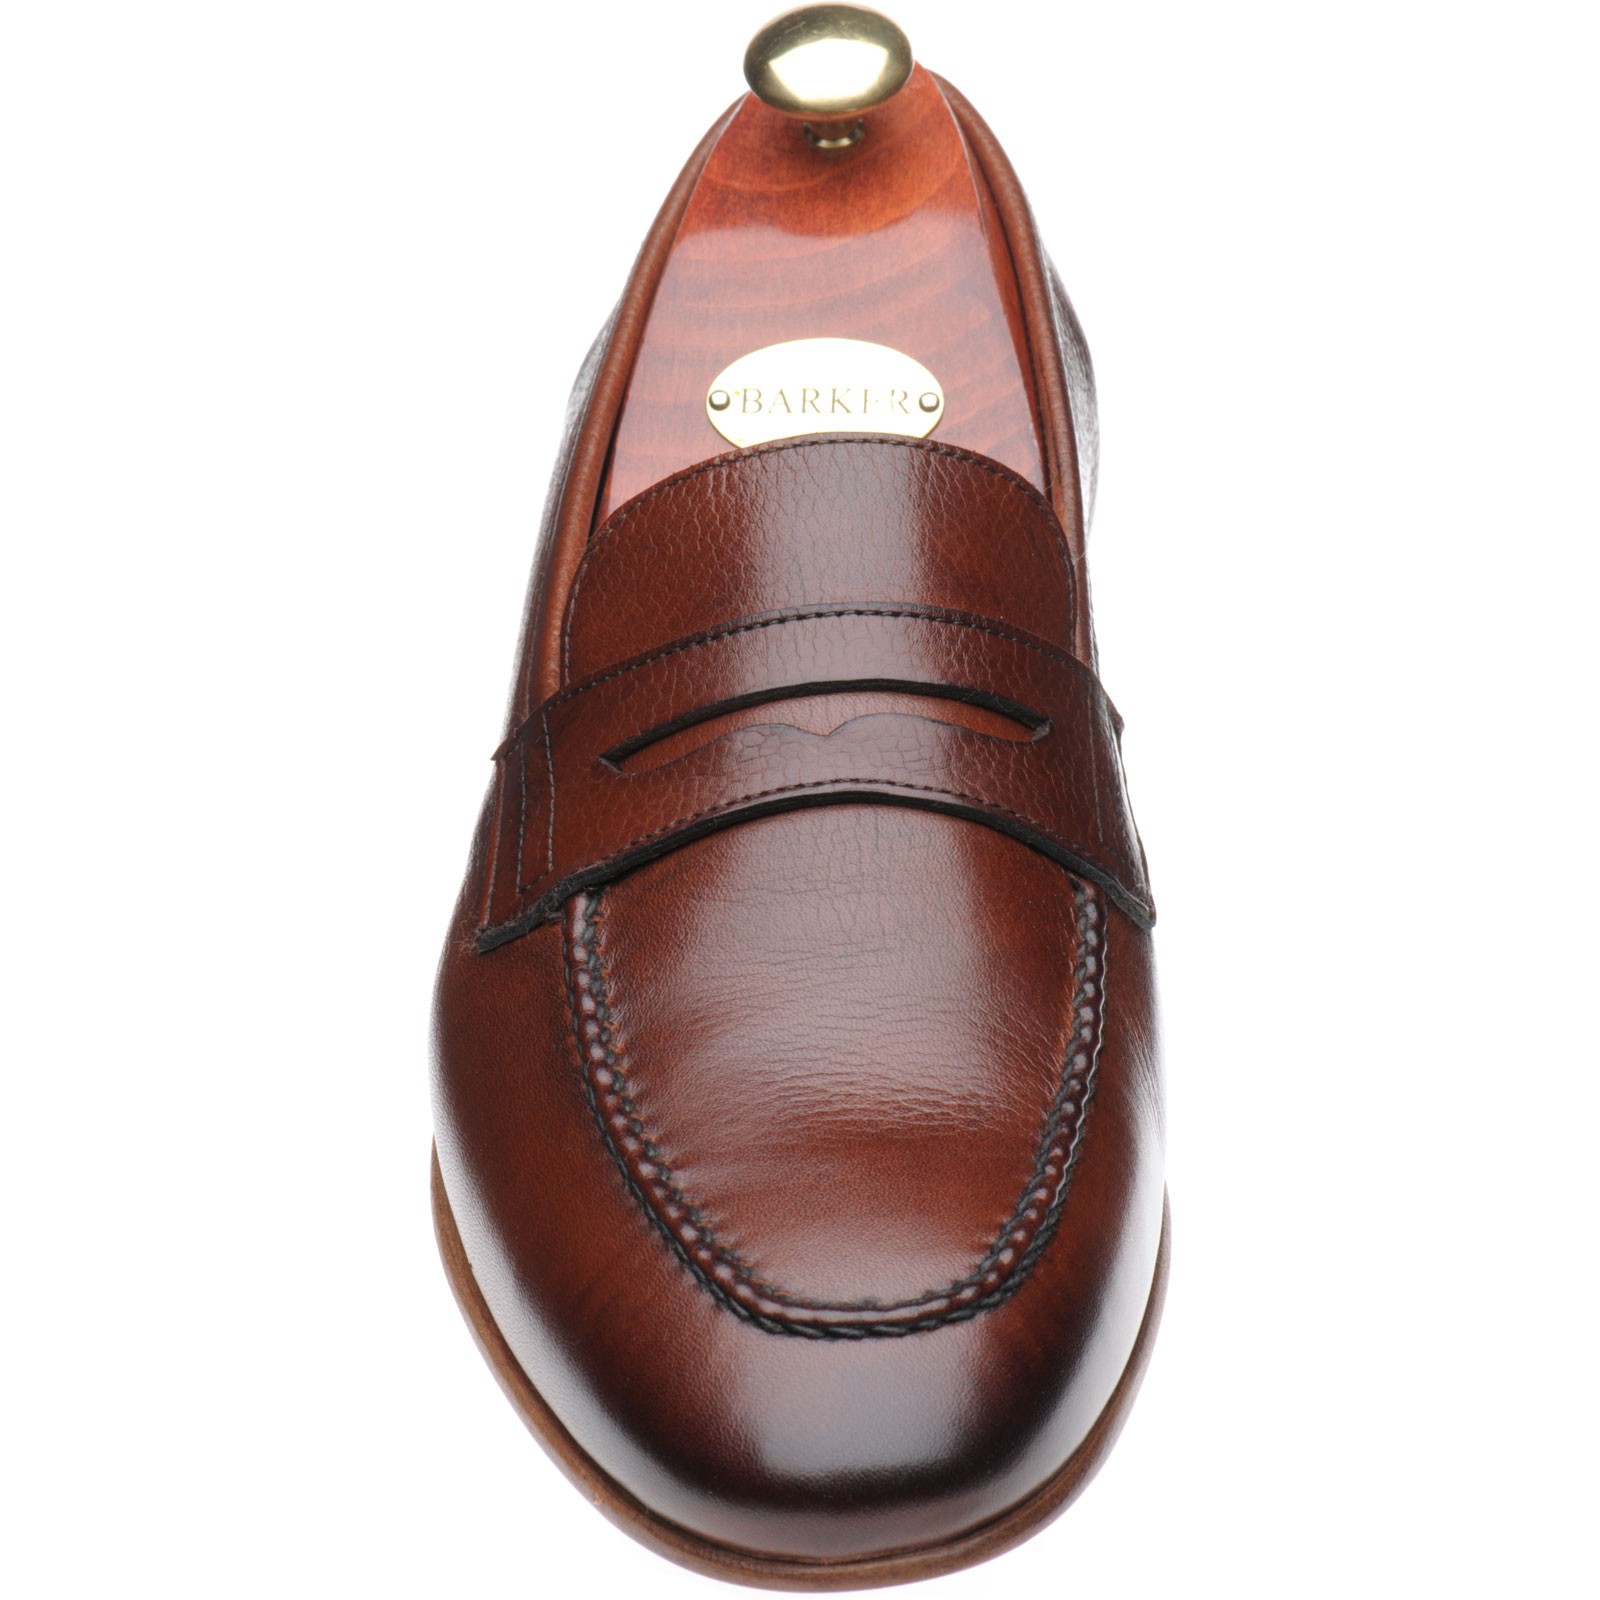 Barker shoes | Barker Moccasin Collection | Ledley in Cherry Grain at ...